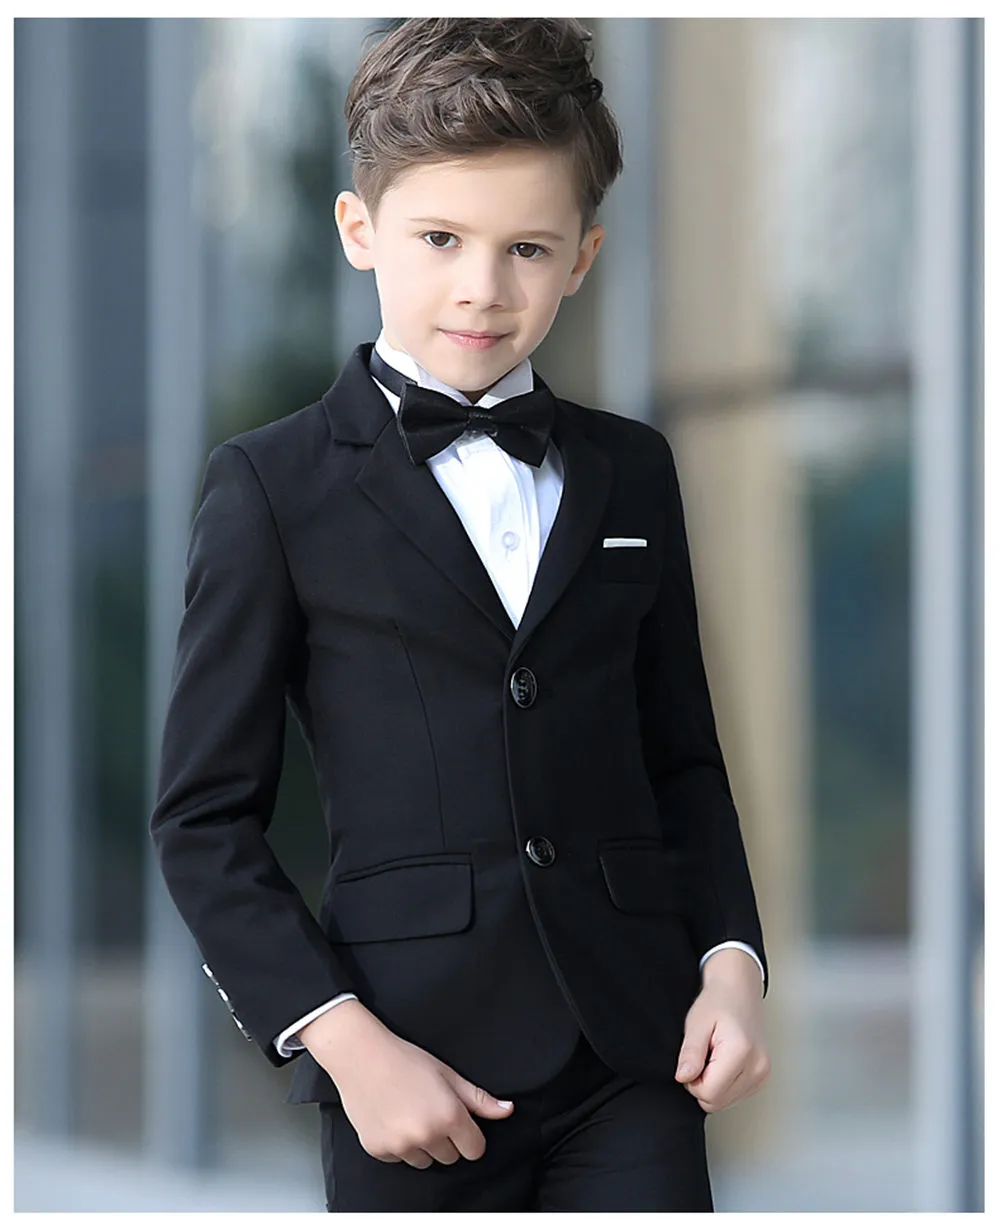 Boys Suits For Weddings Kids Prom Suits Black Wedding Suits Kids ...